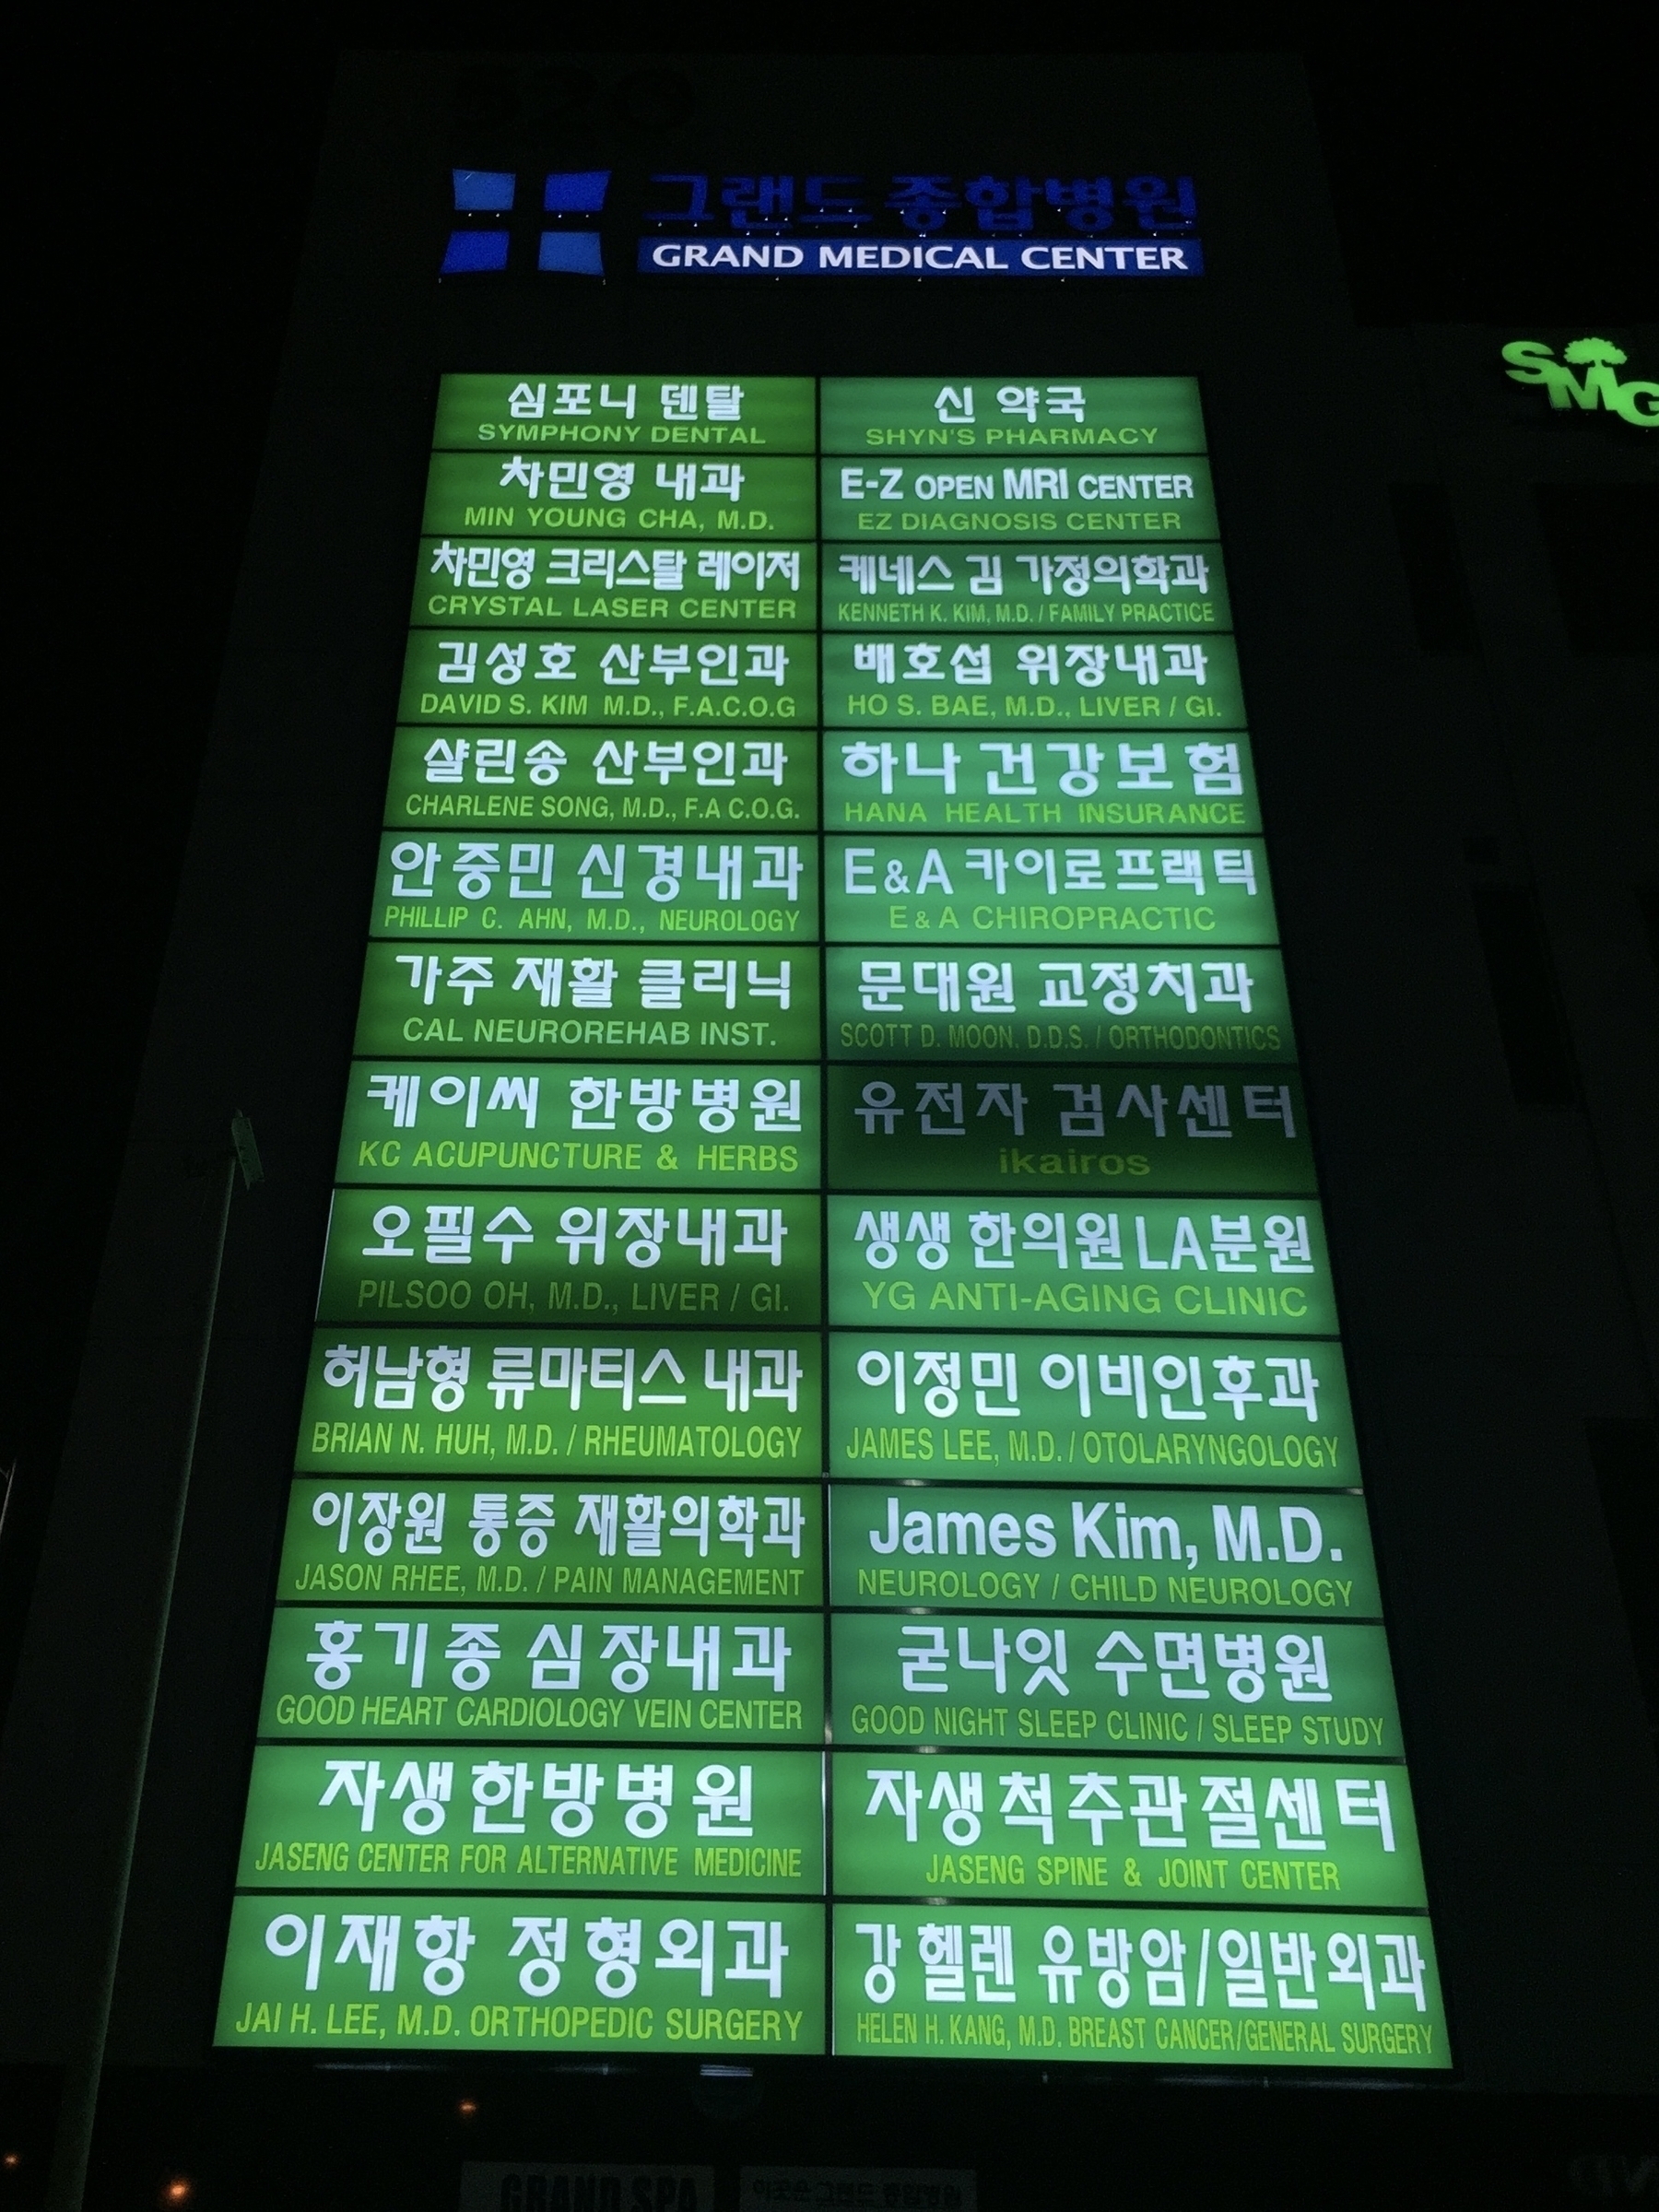 A tall outdoor sign for a medical center with a green glowing background. The sign lists 28 different offices in Korean and English in white lettering, including Jaseng Spine Center.